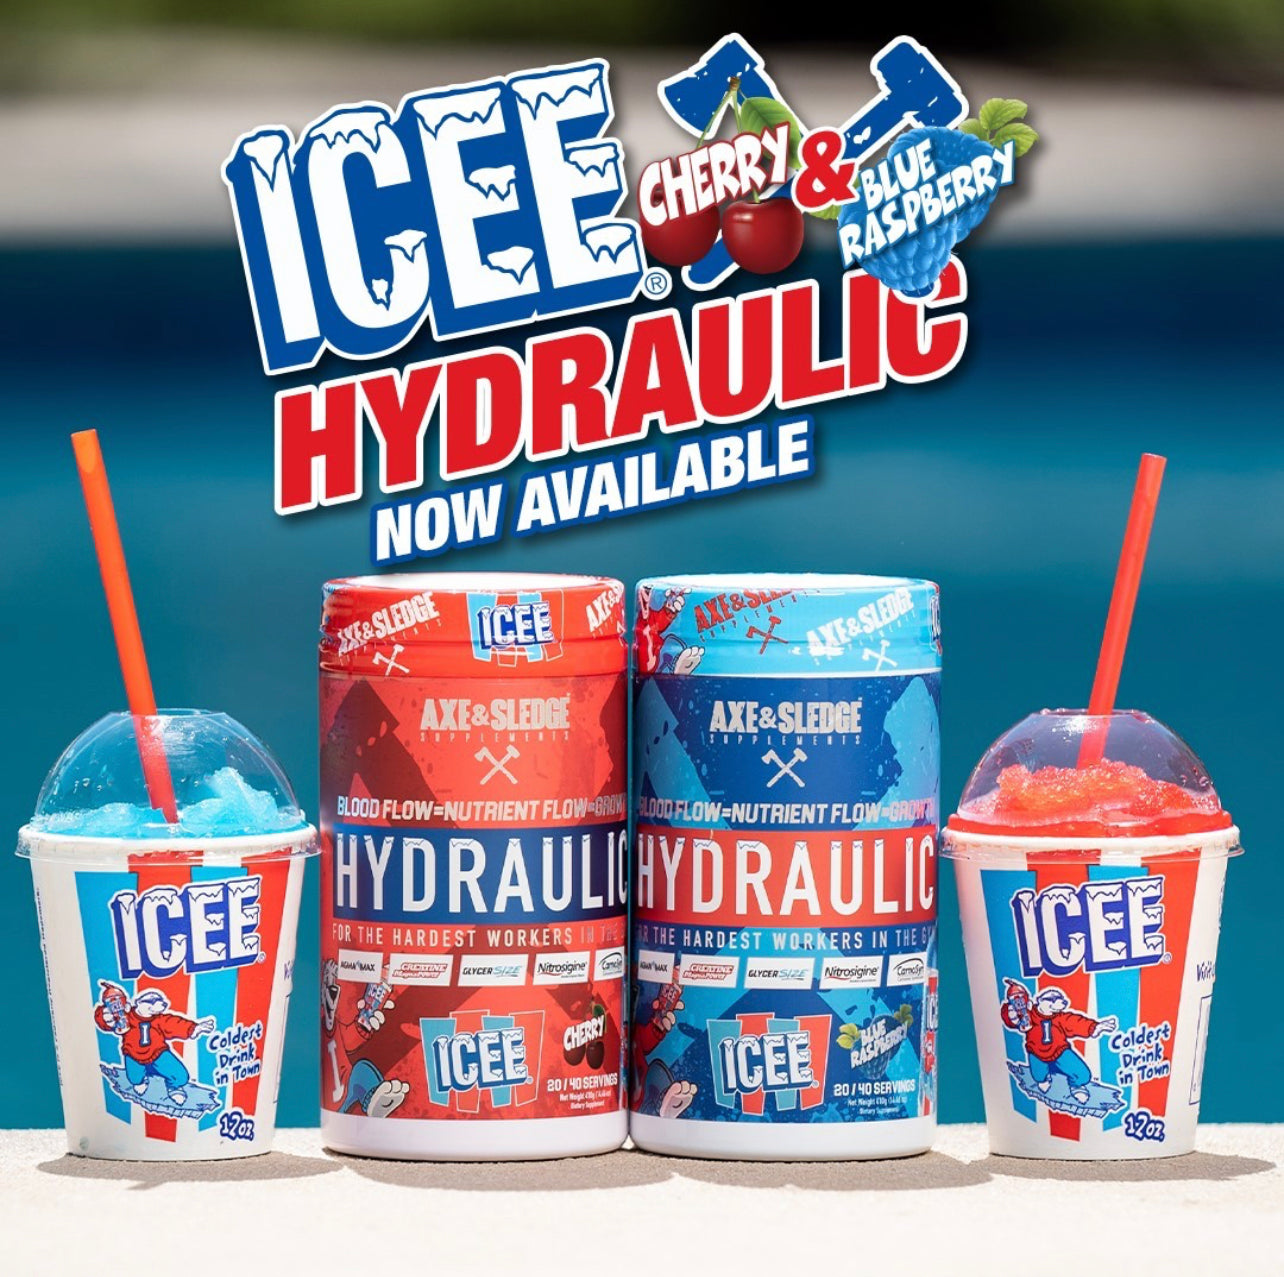 Axe and Sledge Hydraulic ICEE Now Available